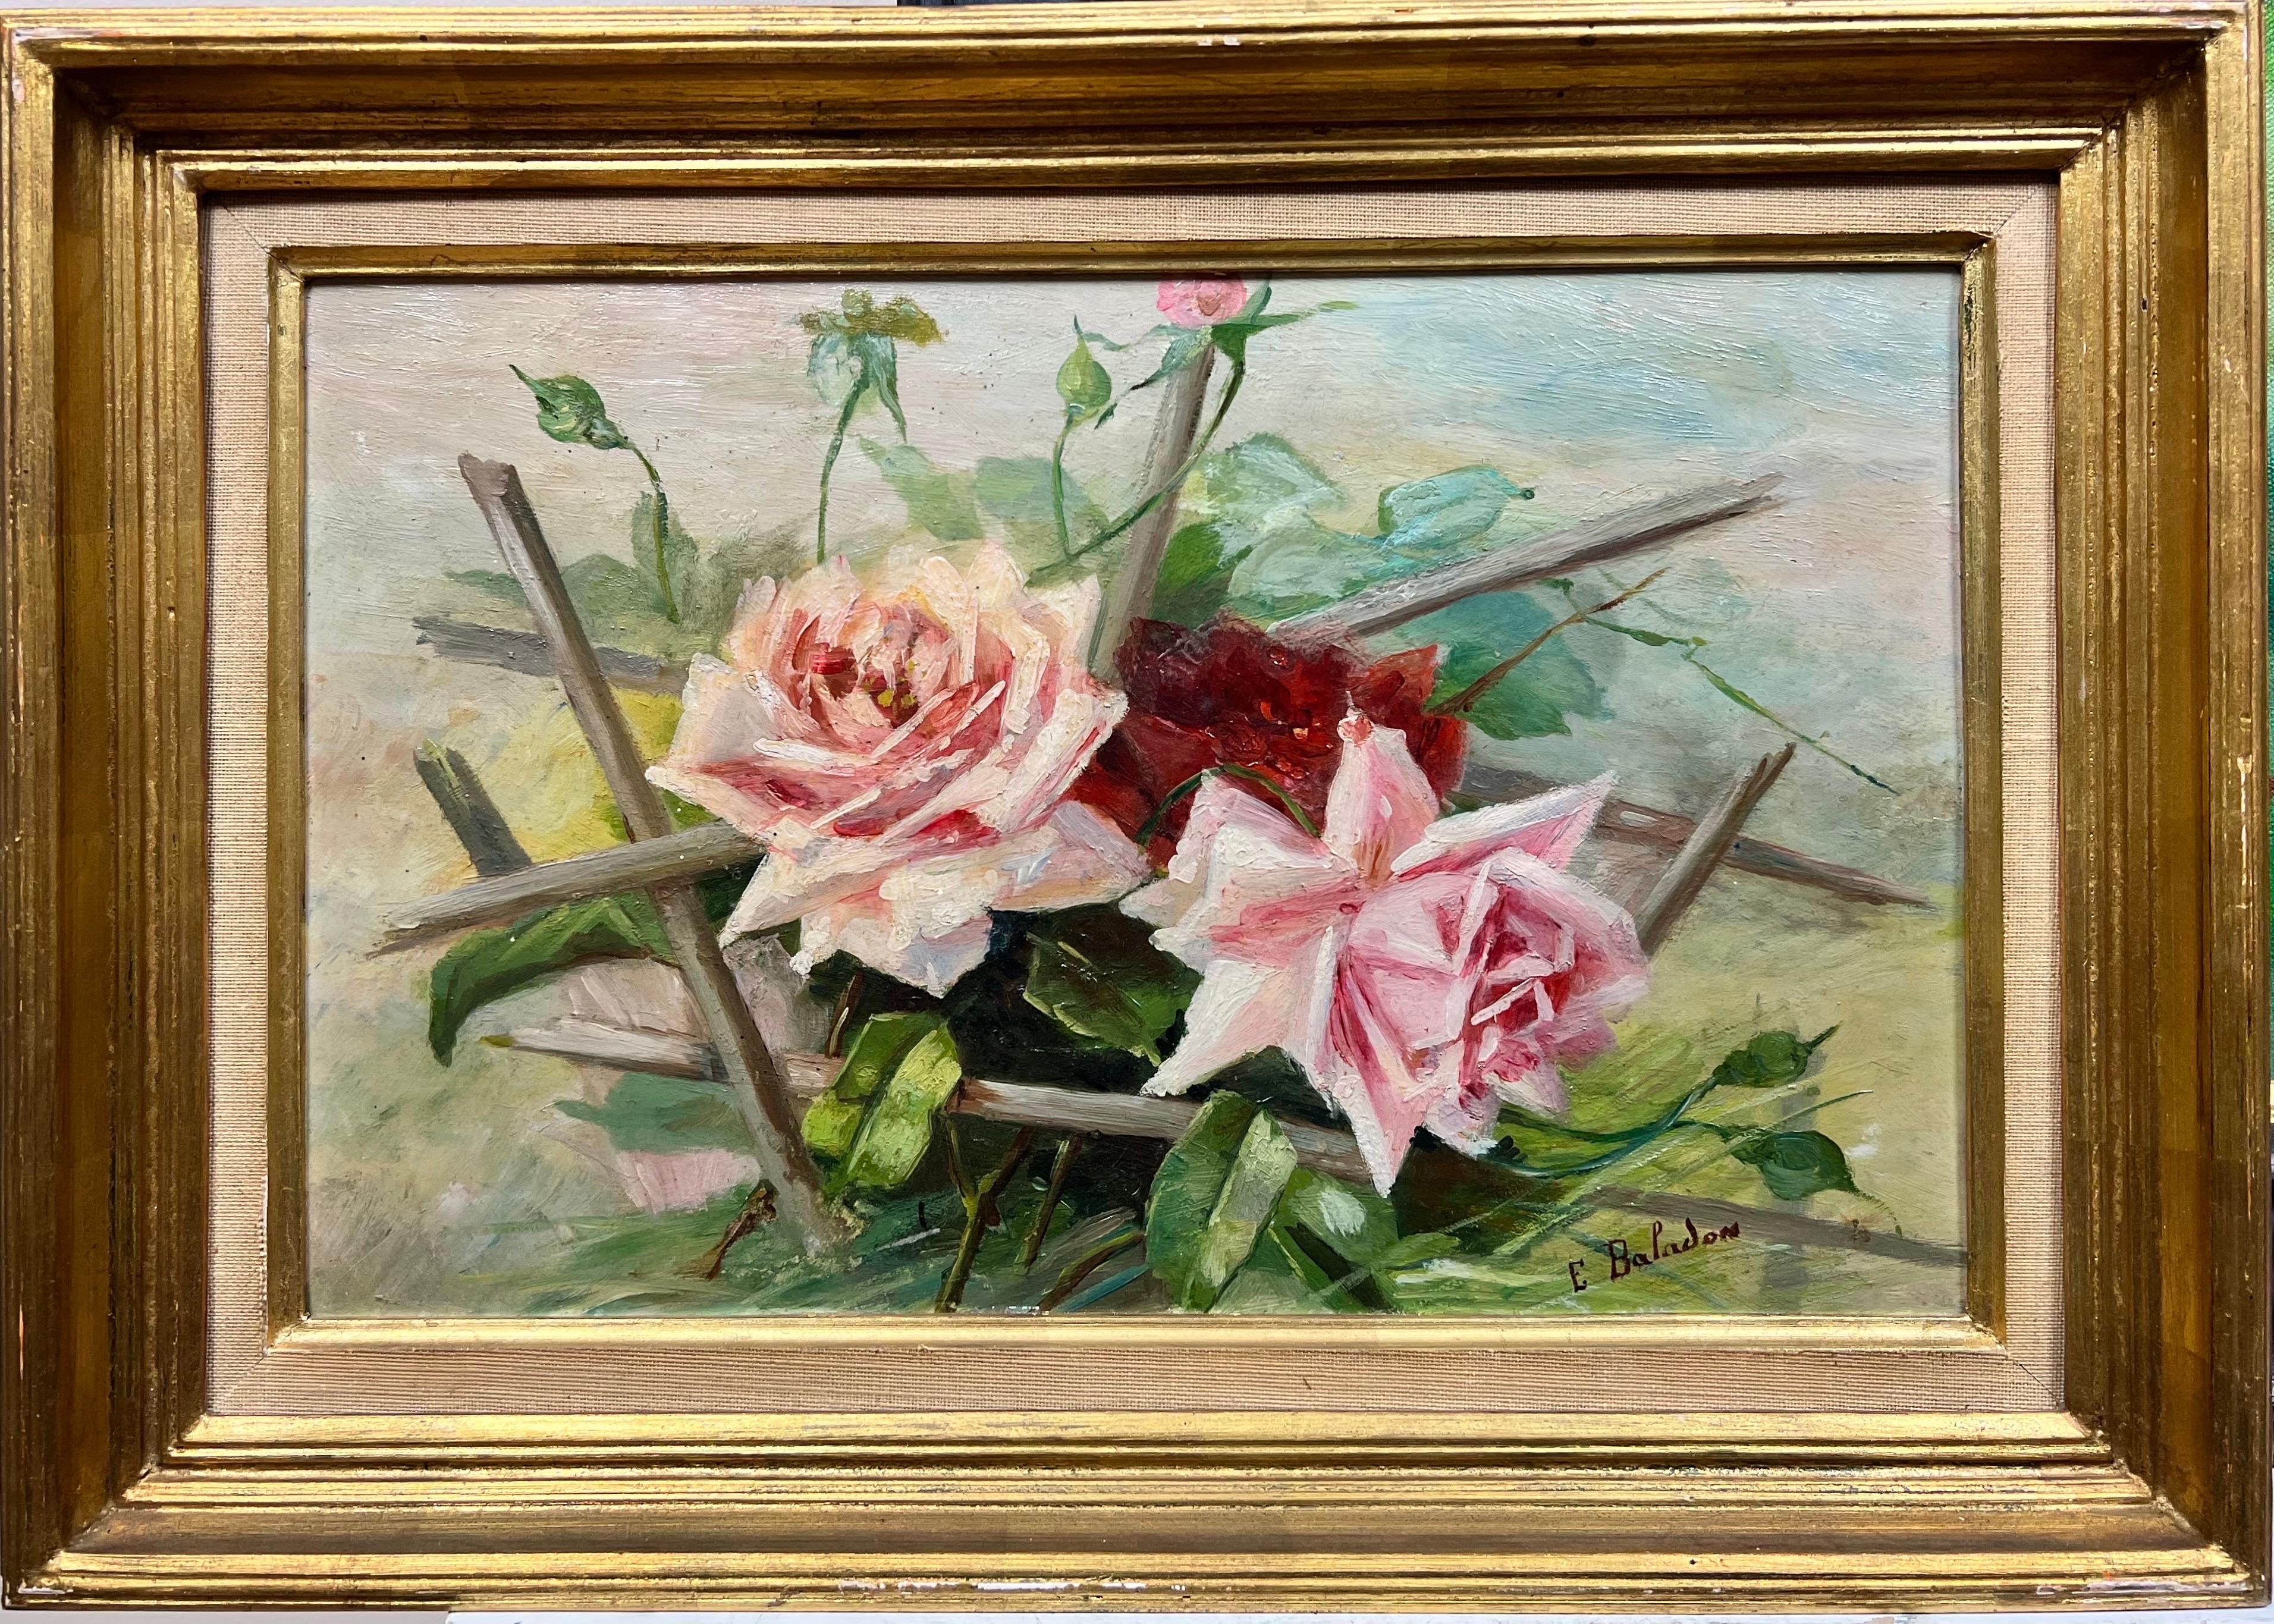 S.E. Baladon Still-Life Painting - Vintage French Signed Oil Painting Sprig of Roses in a Natural Setting